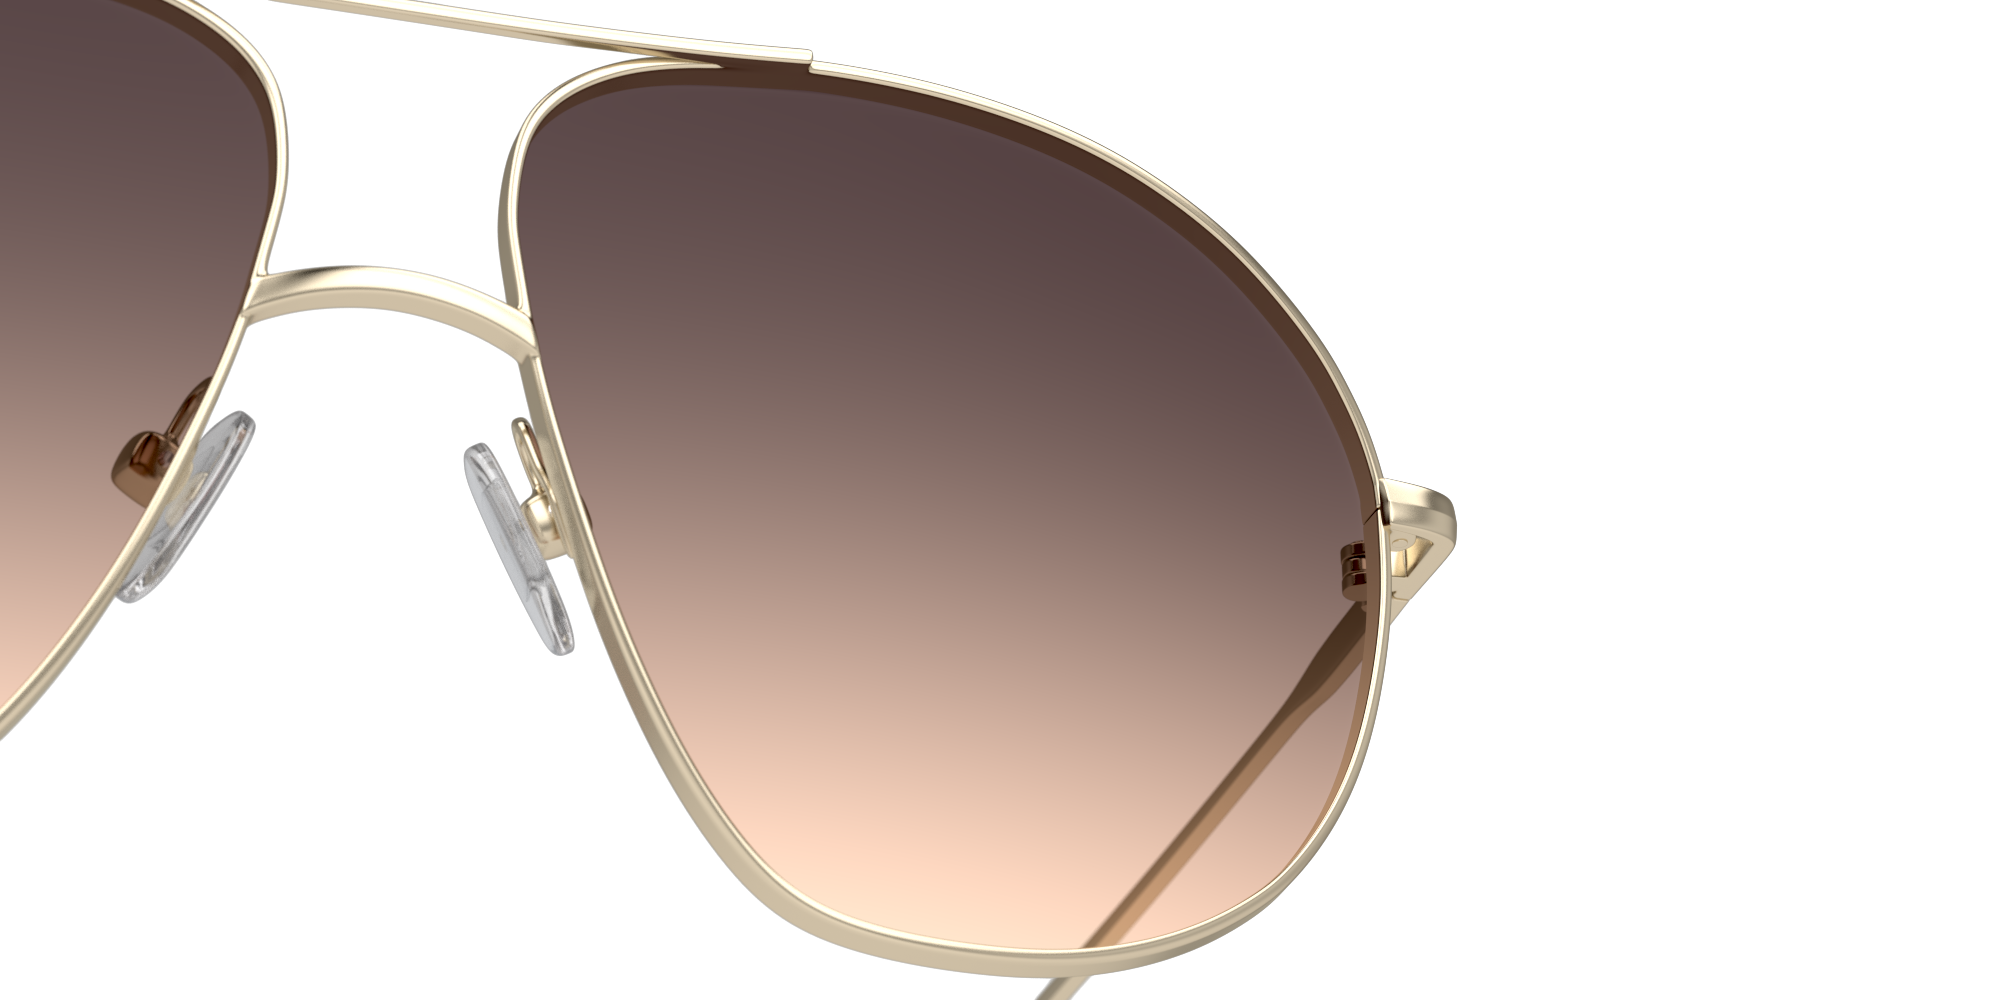 Detail01 Unofficial UNSF0183 Sunglasses Pink / Gold